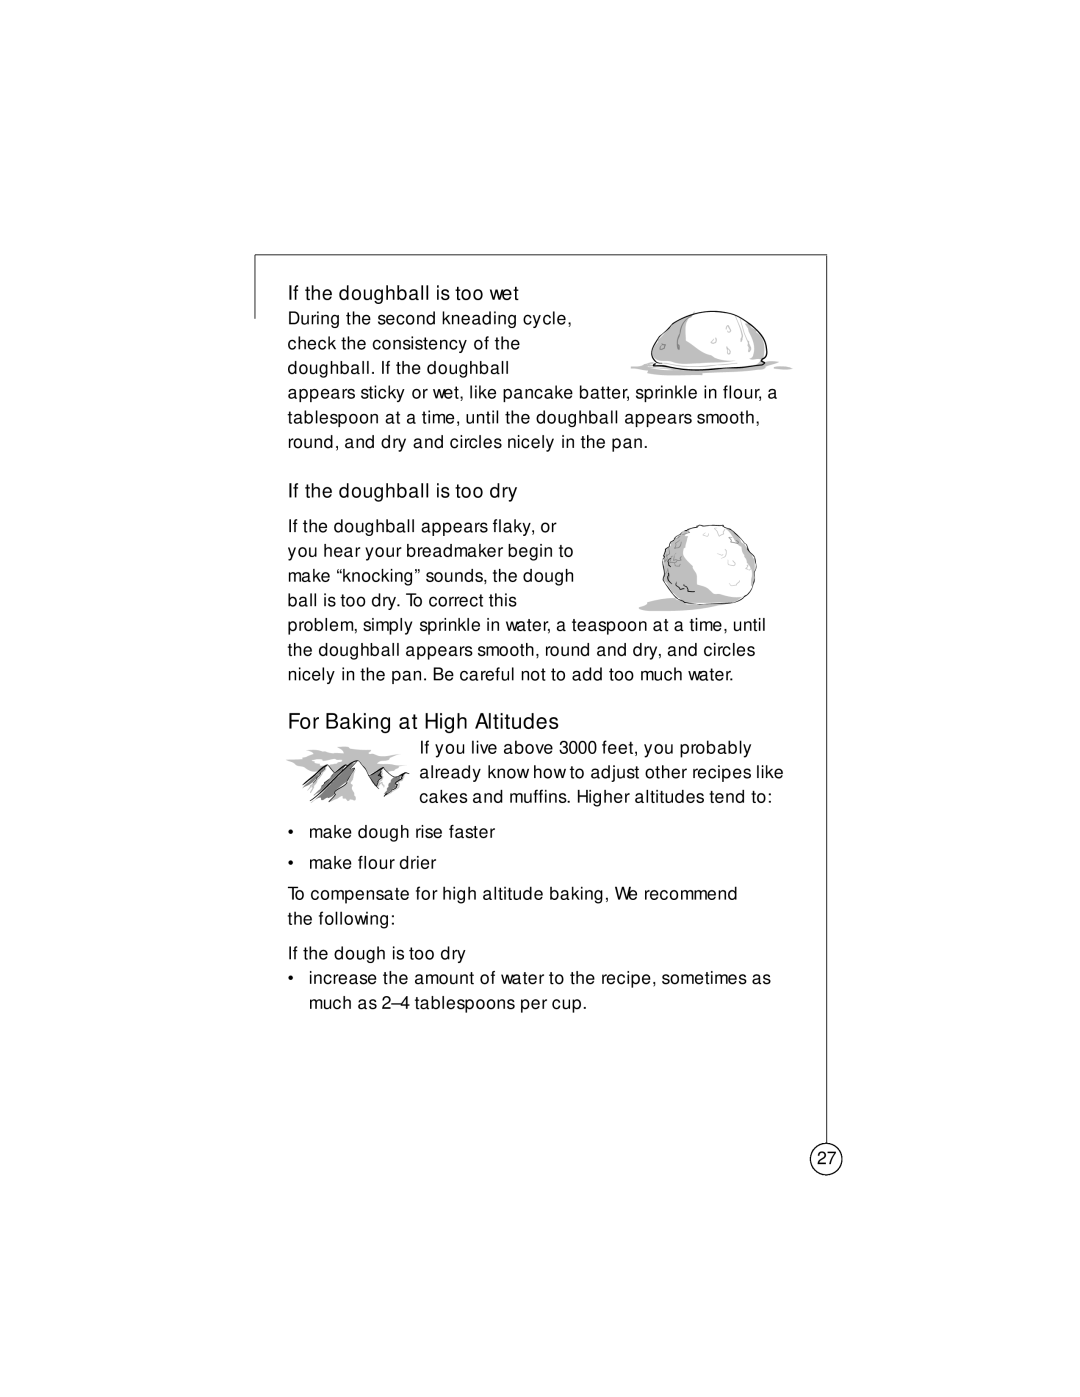 Sunbeam 102817, 5834 user manual For Baking at High Altitudes, If the doughball is too dry 